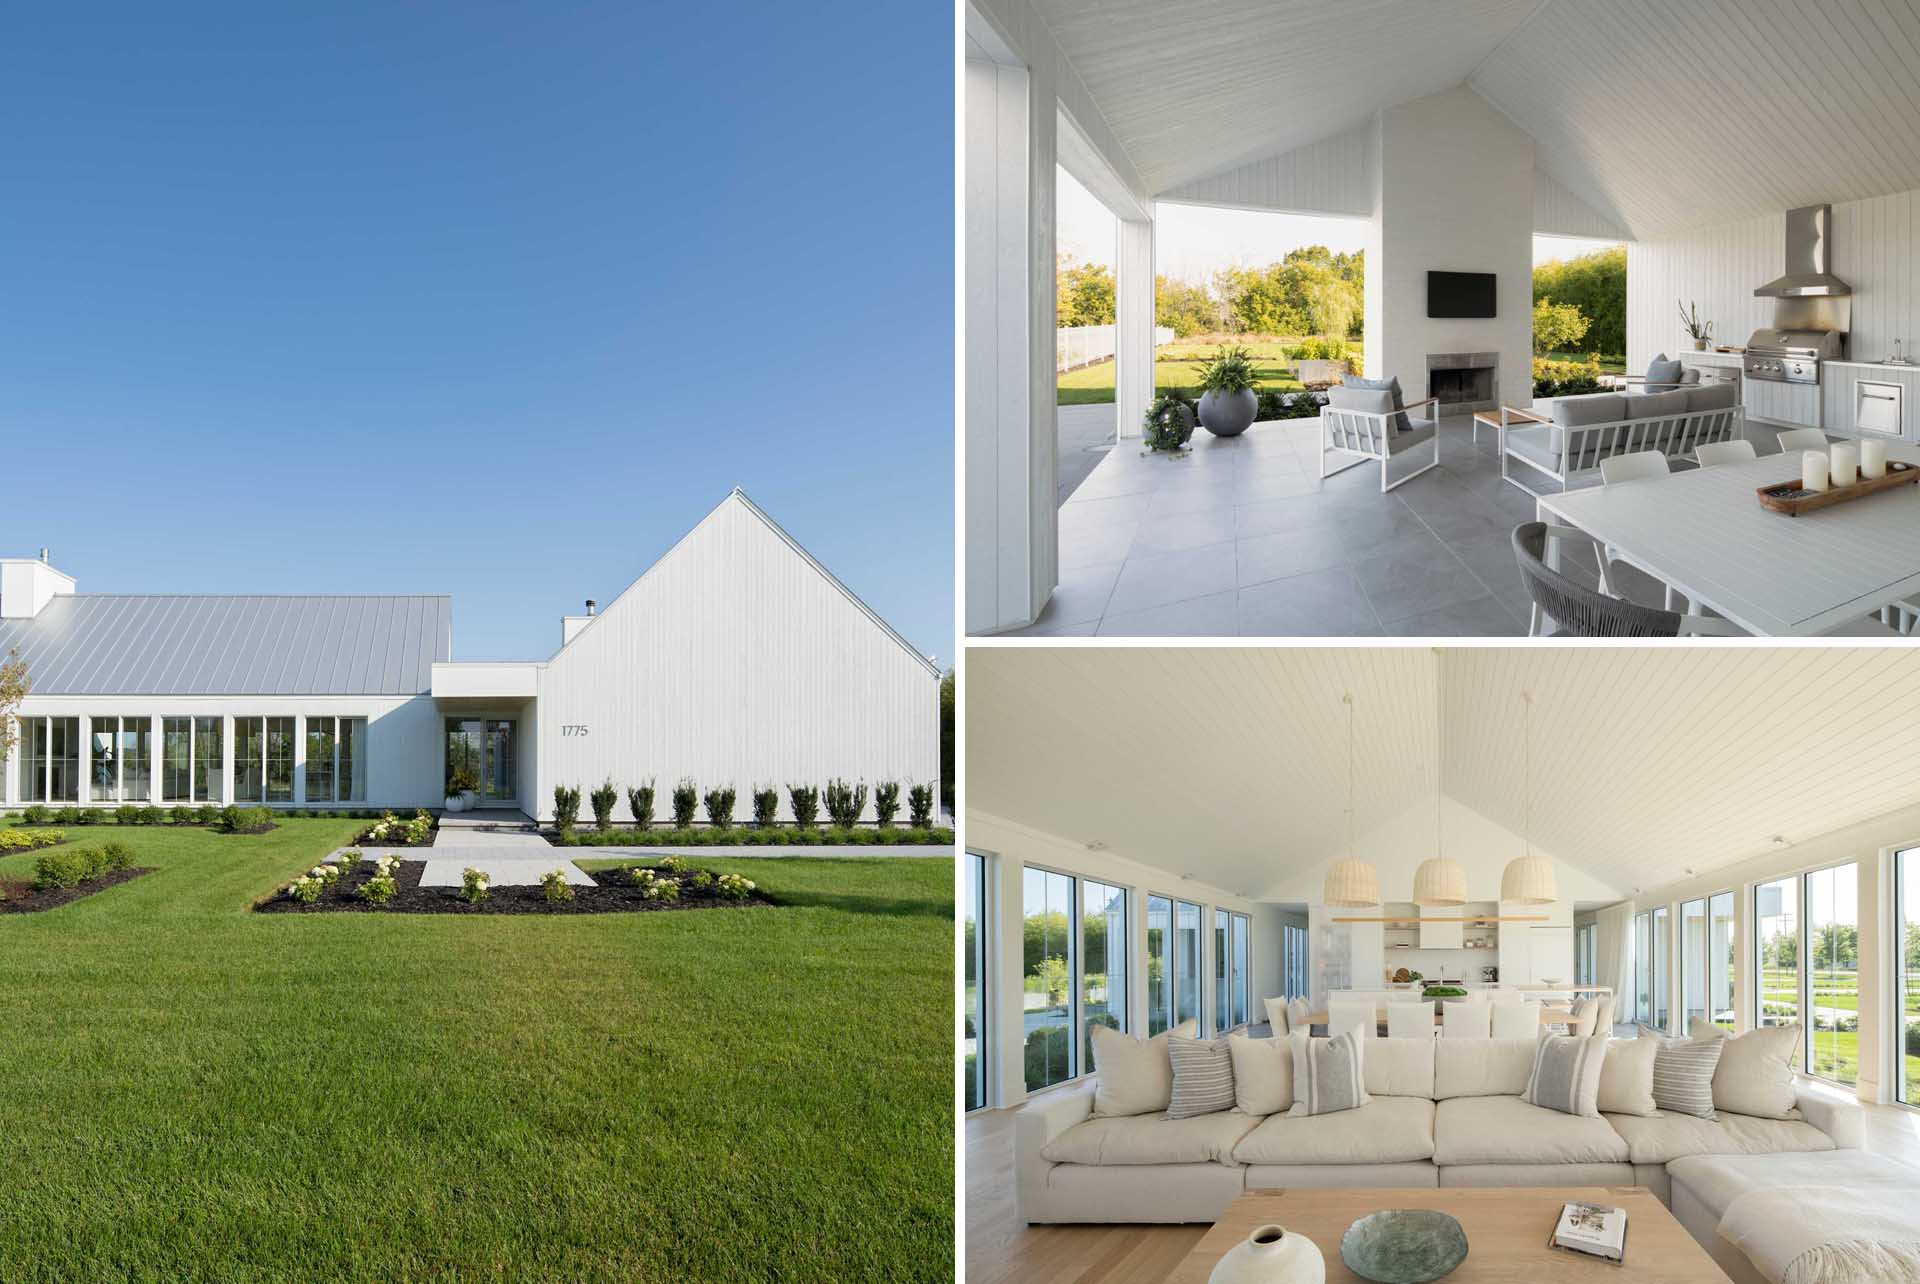 A contemporary house with a white exterior and matching interior.